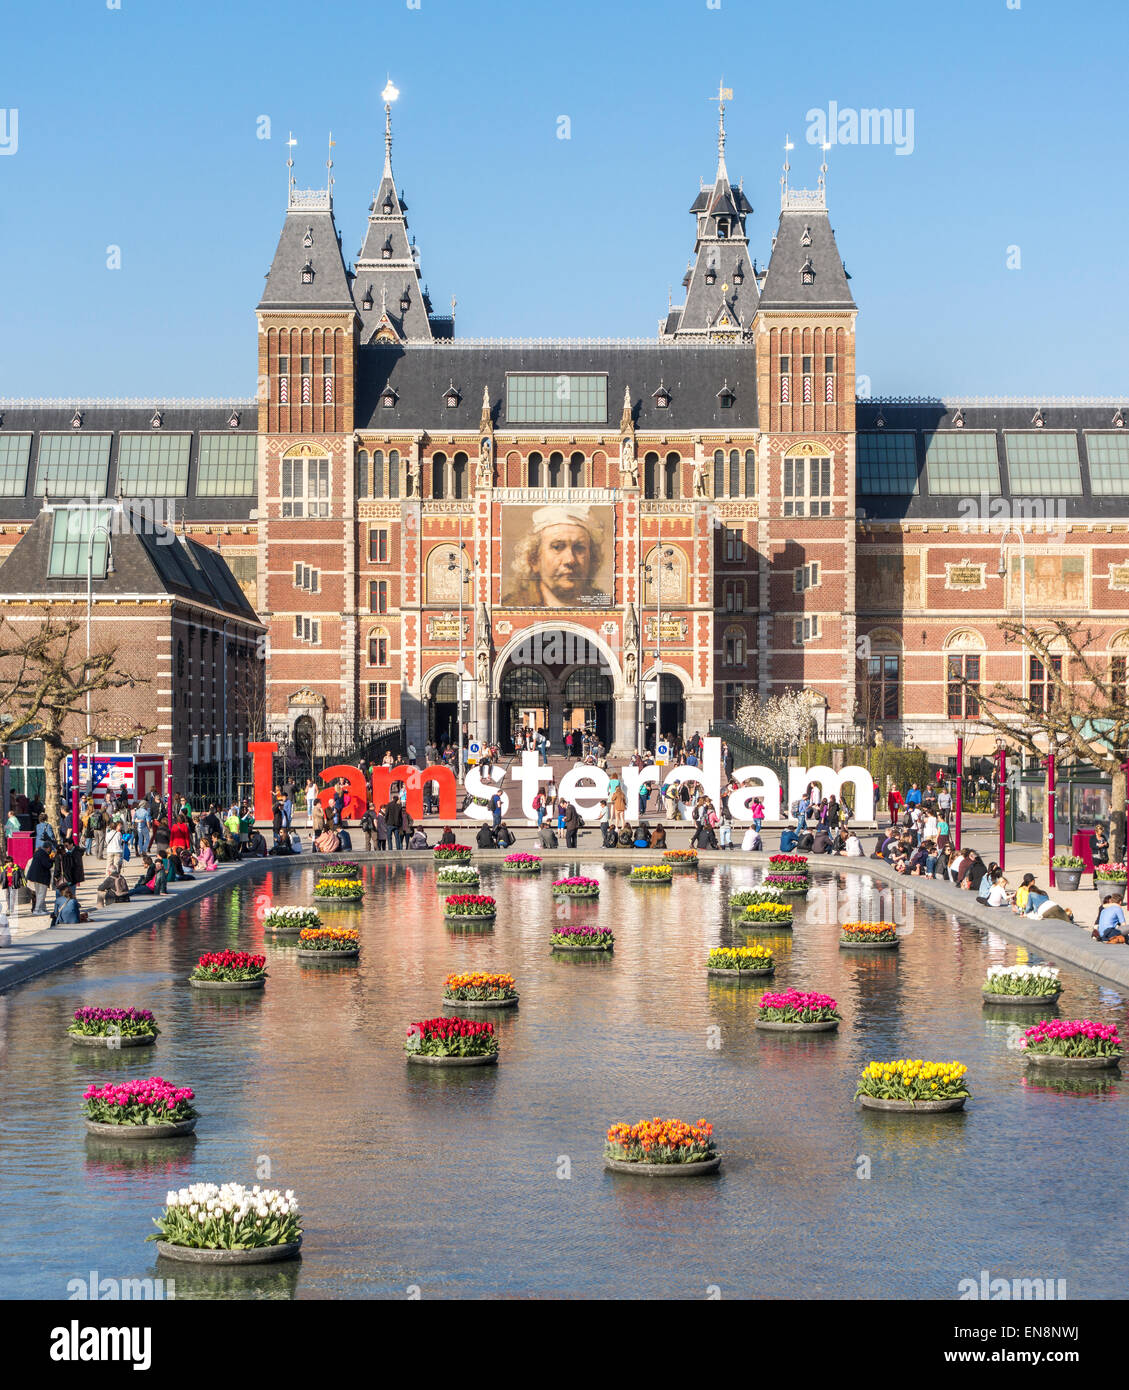 Rijksmuseum Amsterdam Rijksmuseum National Museum with I Amsterdam sign IAmsterdam and tulips in the reflecting pool. Stock Photo